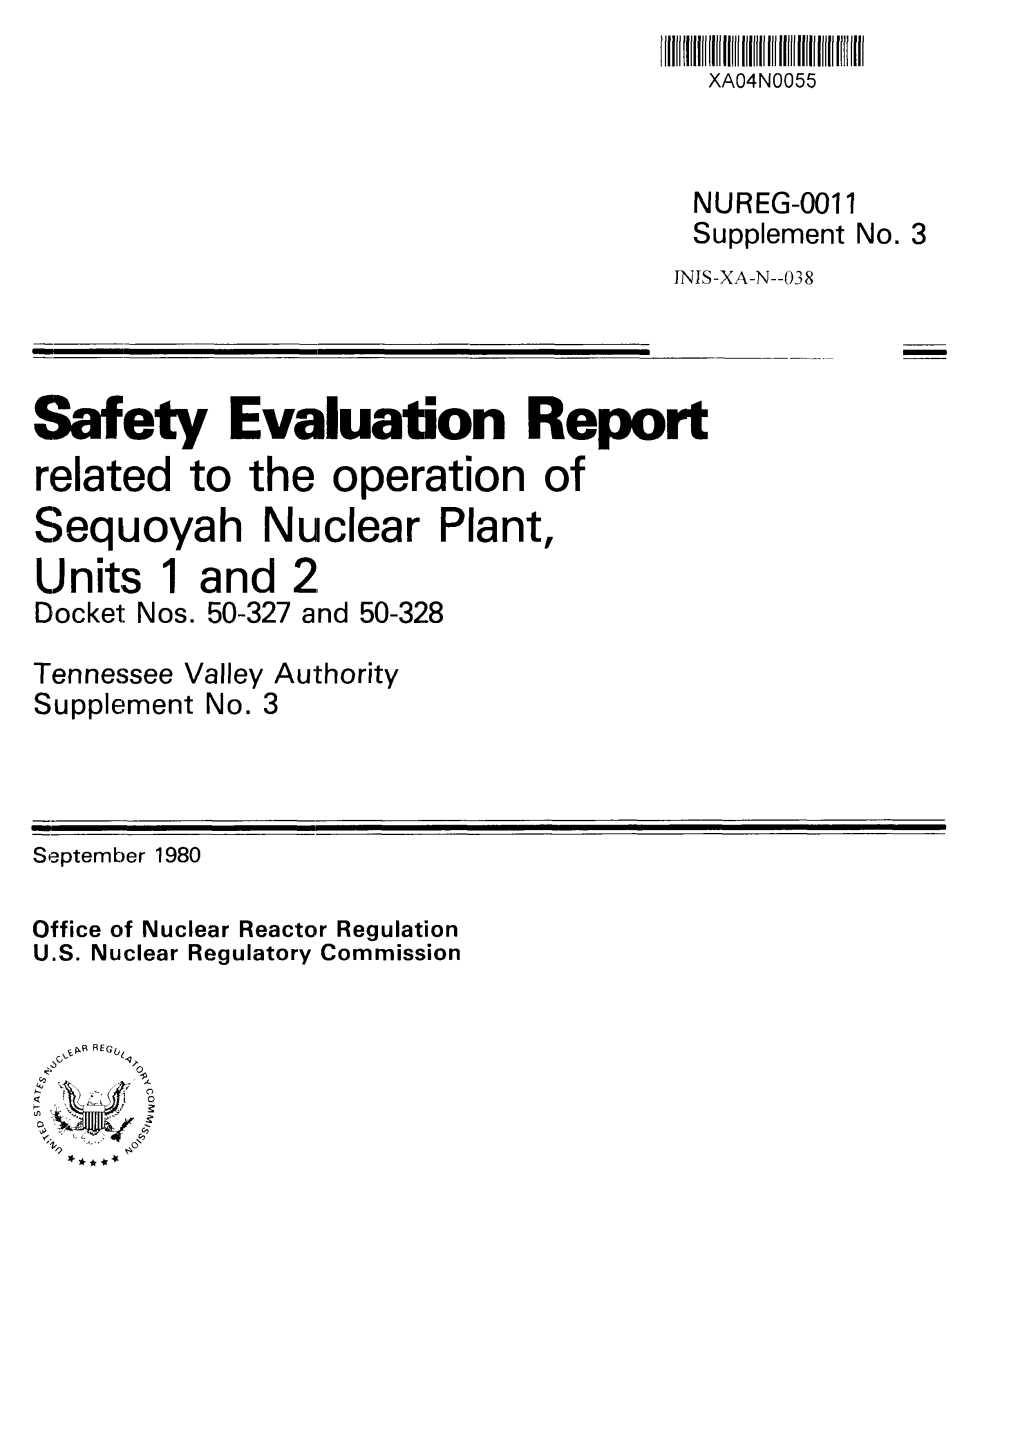 Safety Evaluation Report Related to the Operation of Sequoyah Nuclear Plant, Units and 2, Docket Nos